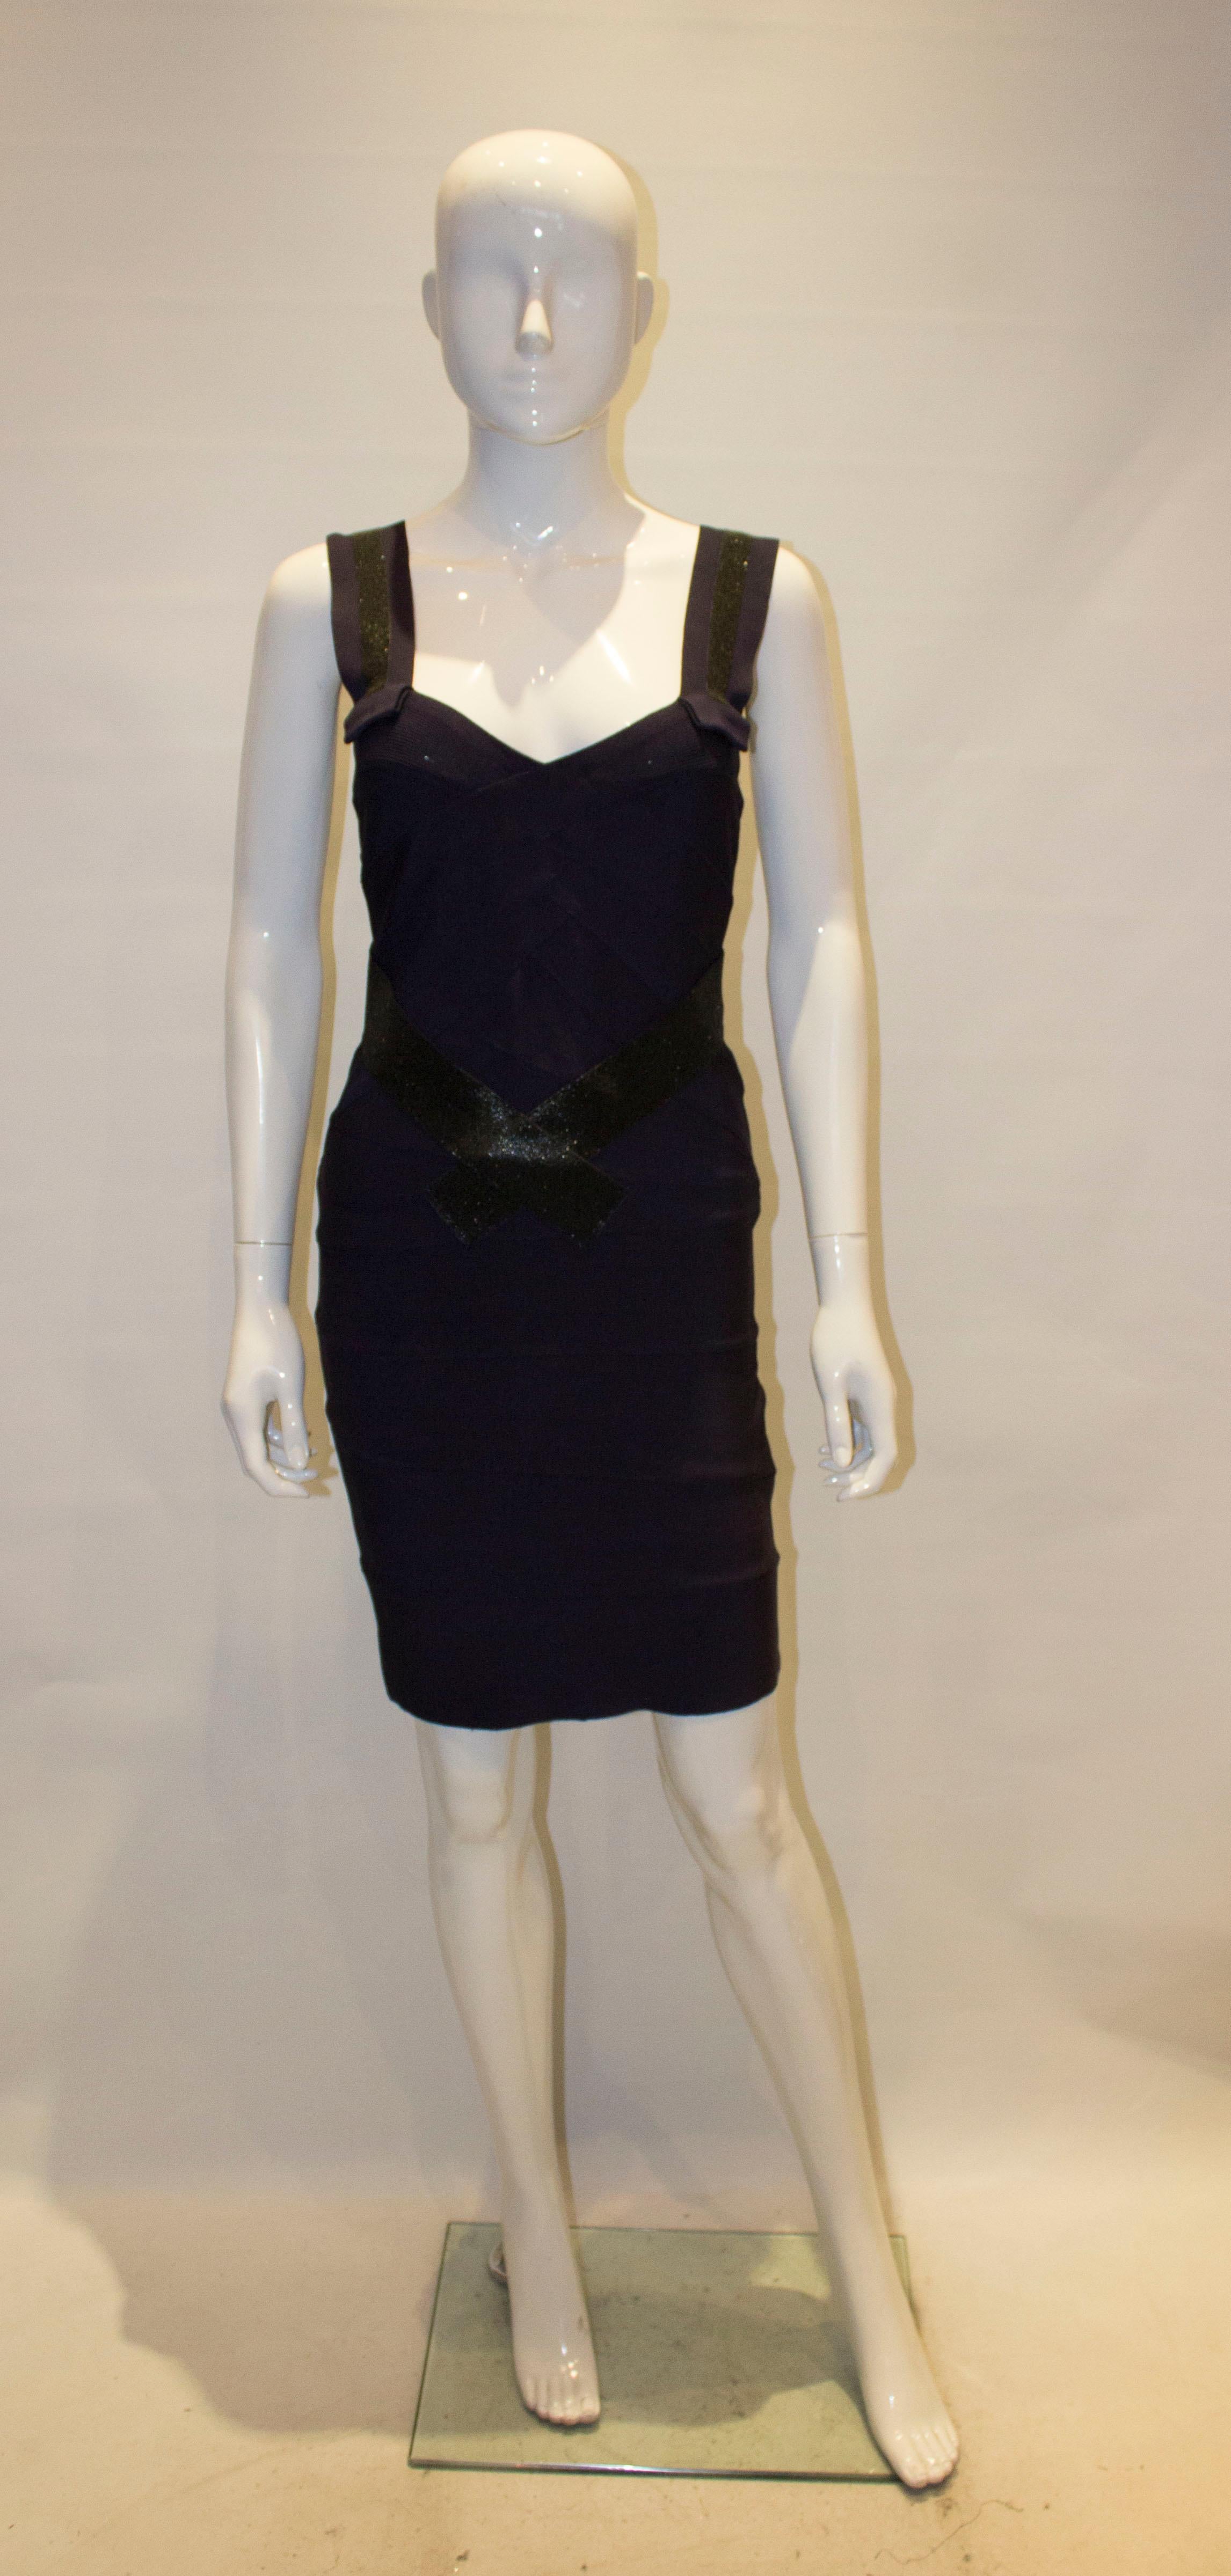 A chic cocktail dress by Herve Leger. The dress is in an attractive  dark aubergine colour with black sparkle detail on the shoulder straps, front and back.
Measurements: the dress is marked a size S, bust 32'' before stretch, waist 27'', length 36''